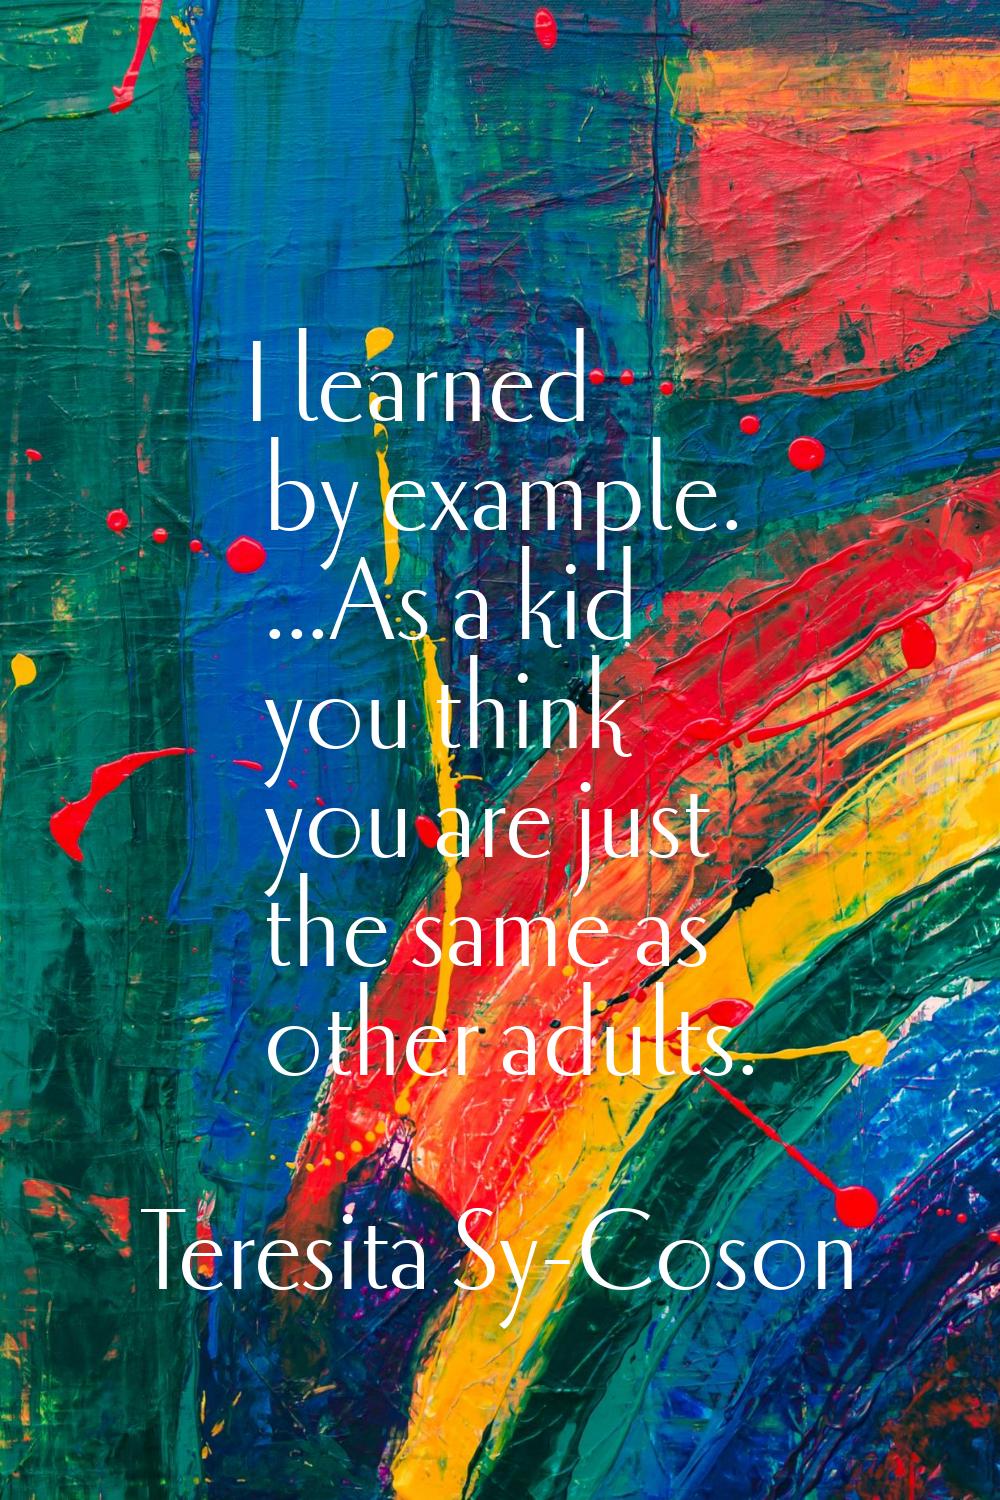 I learned by example. ...As a kid you think you are just the same as other adults.